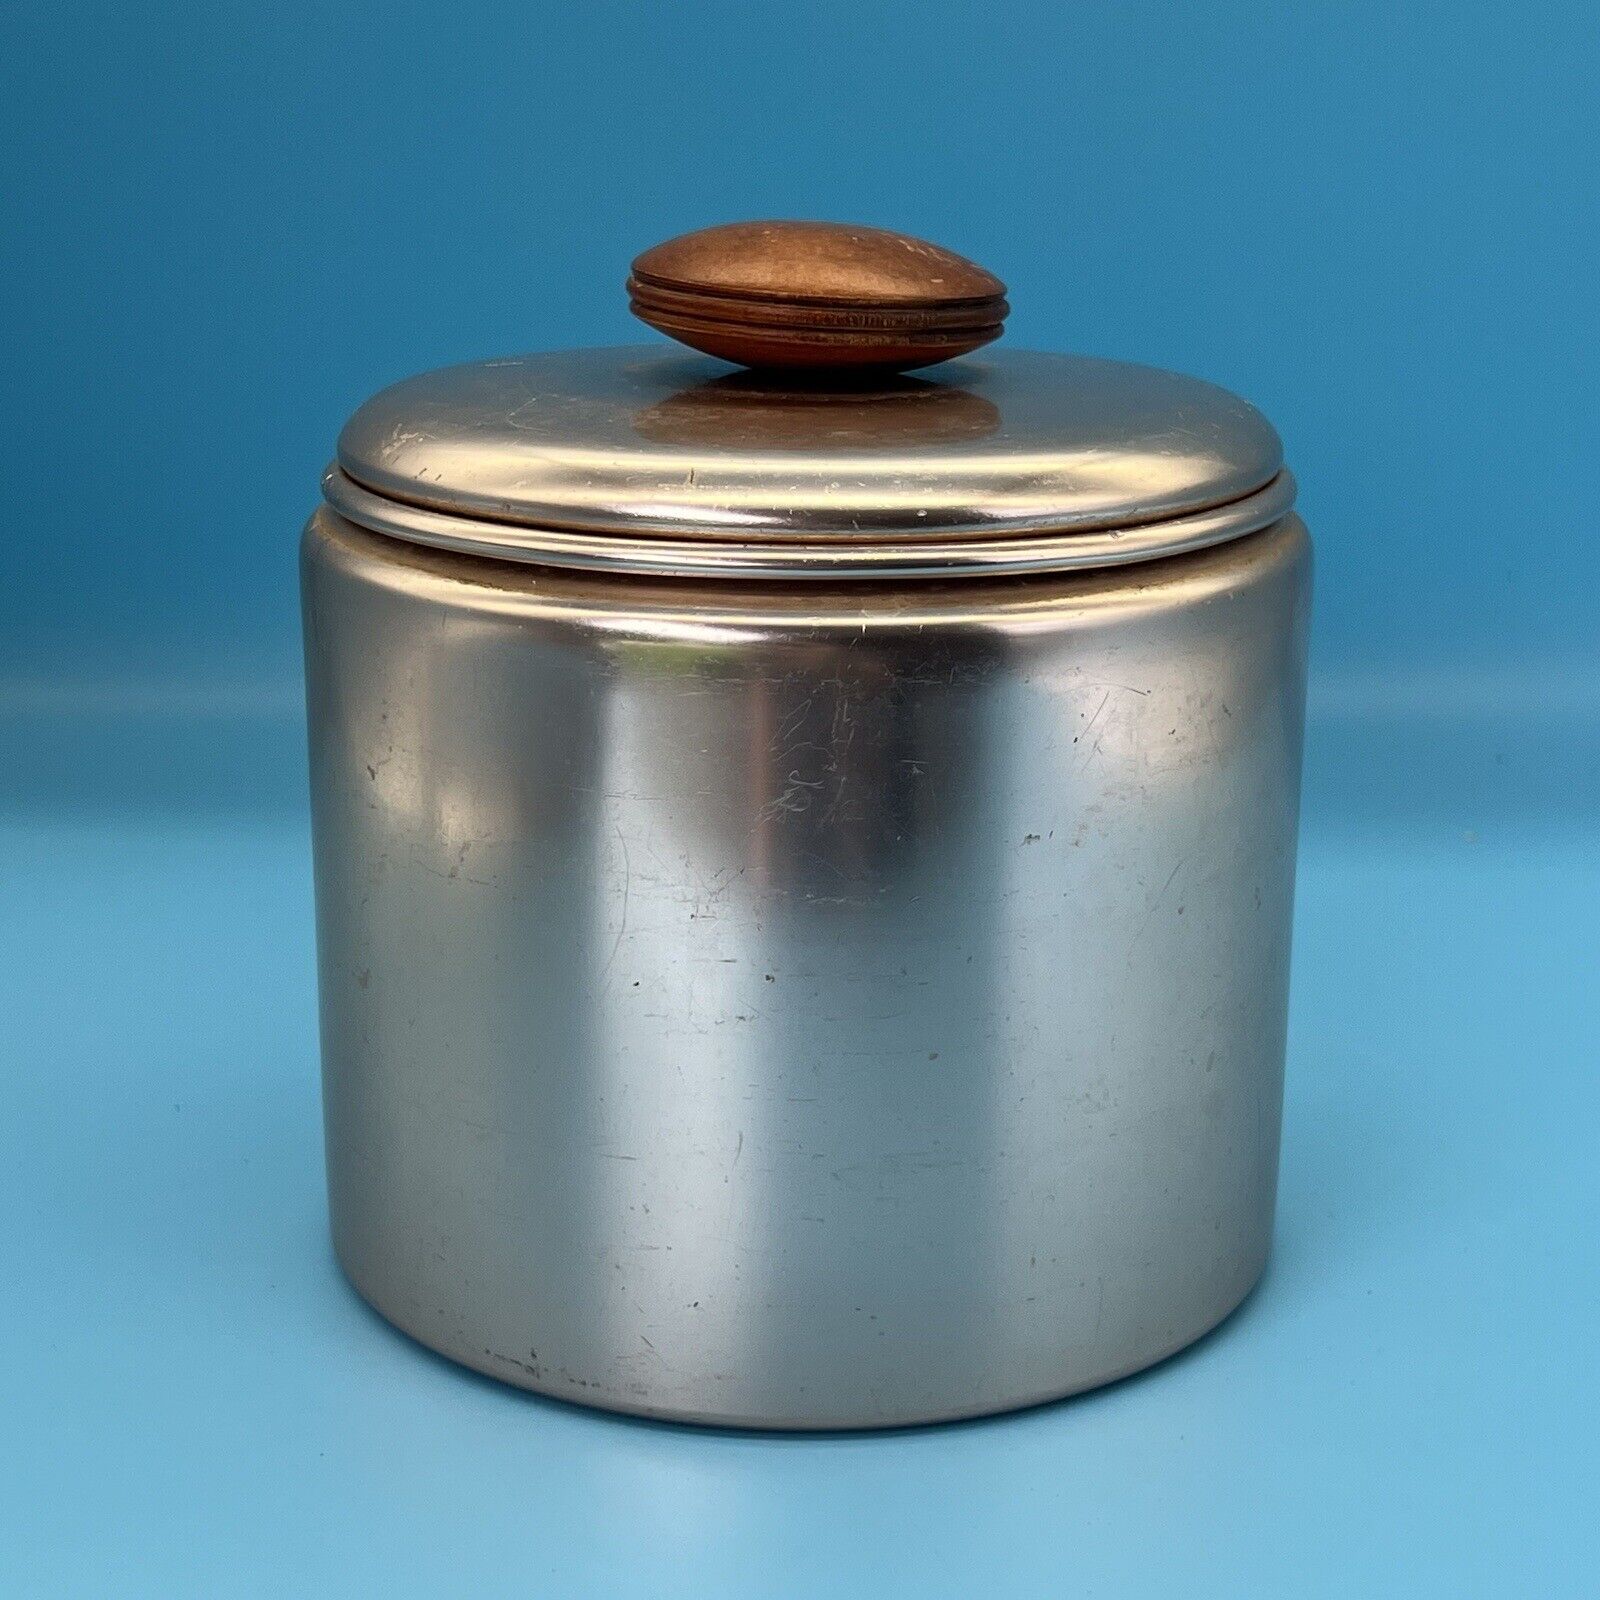 Vintage Mirro Metal & Wood 6” Cannister Copper Colored Inside